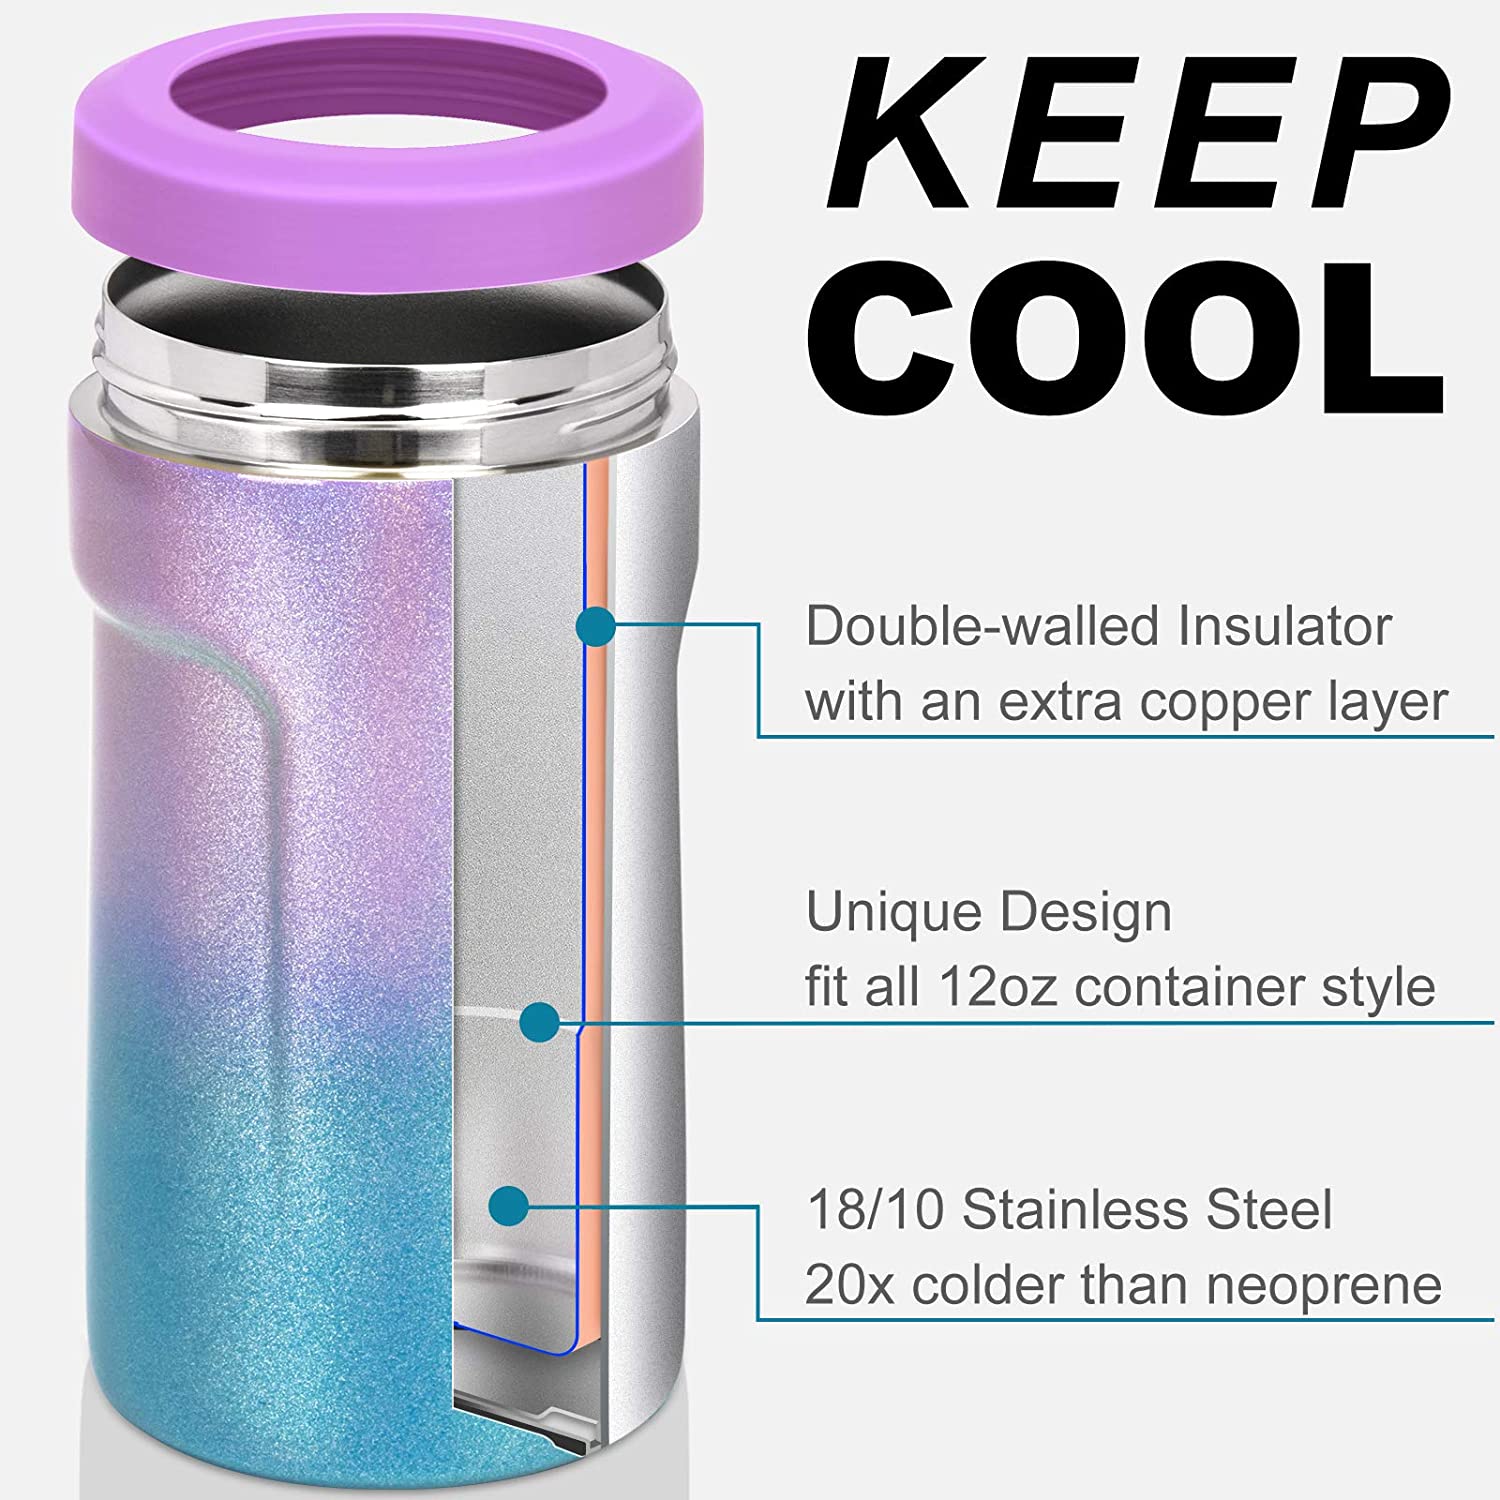 How stainless steel can cooler metal koozie works to keep cold